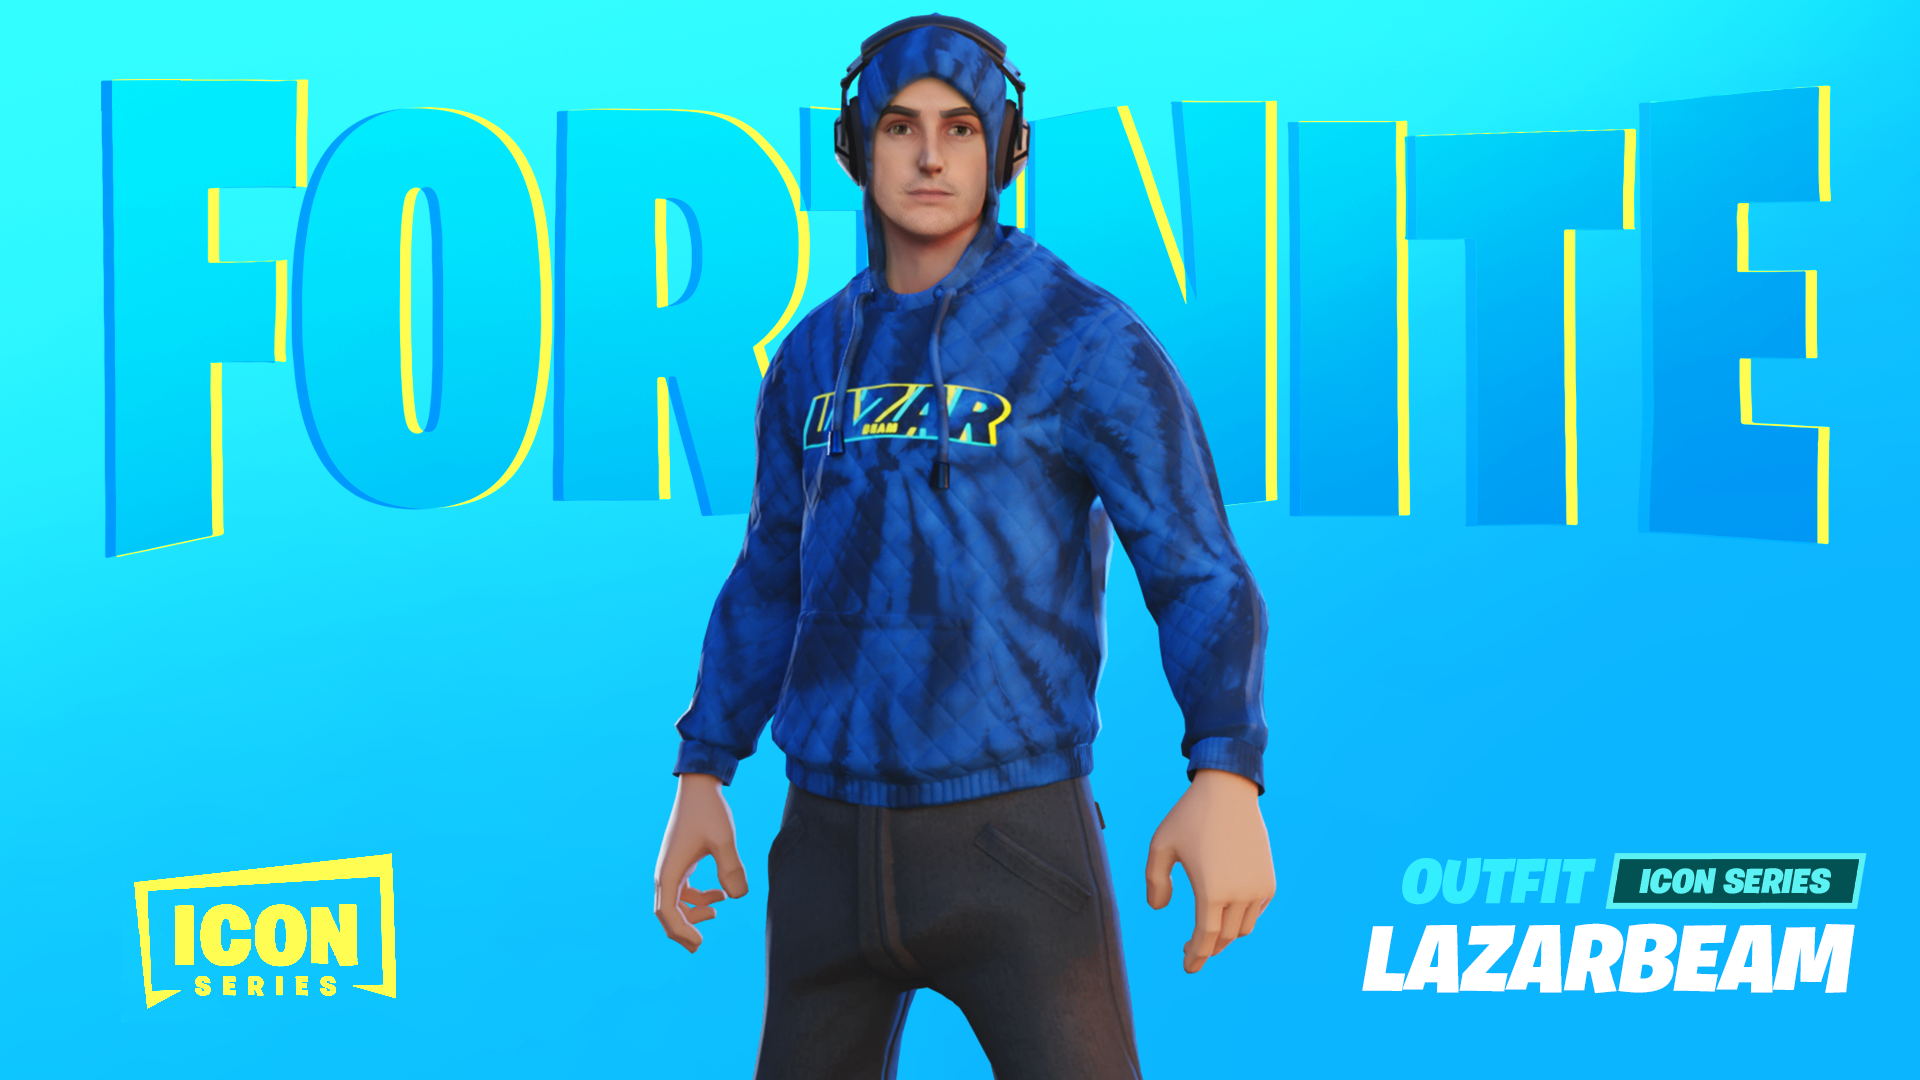 Lazarbeam Icon Series Skin Concept!The head might not be perfect, but I tri...